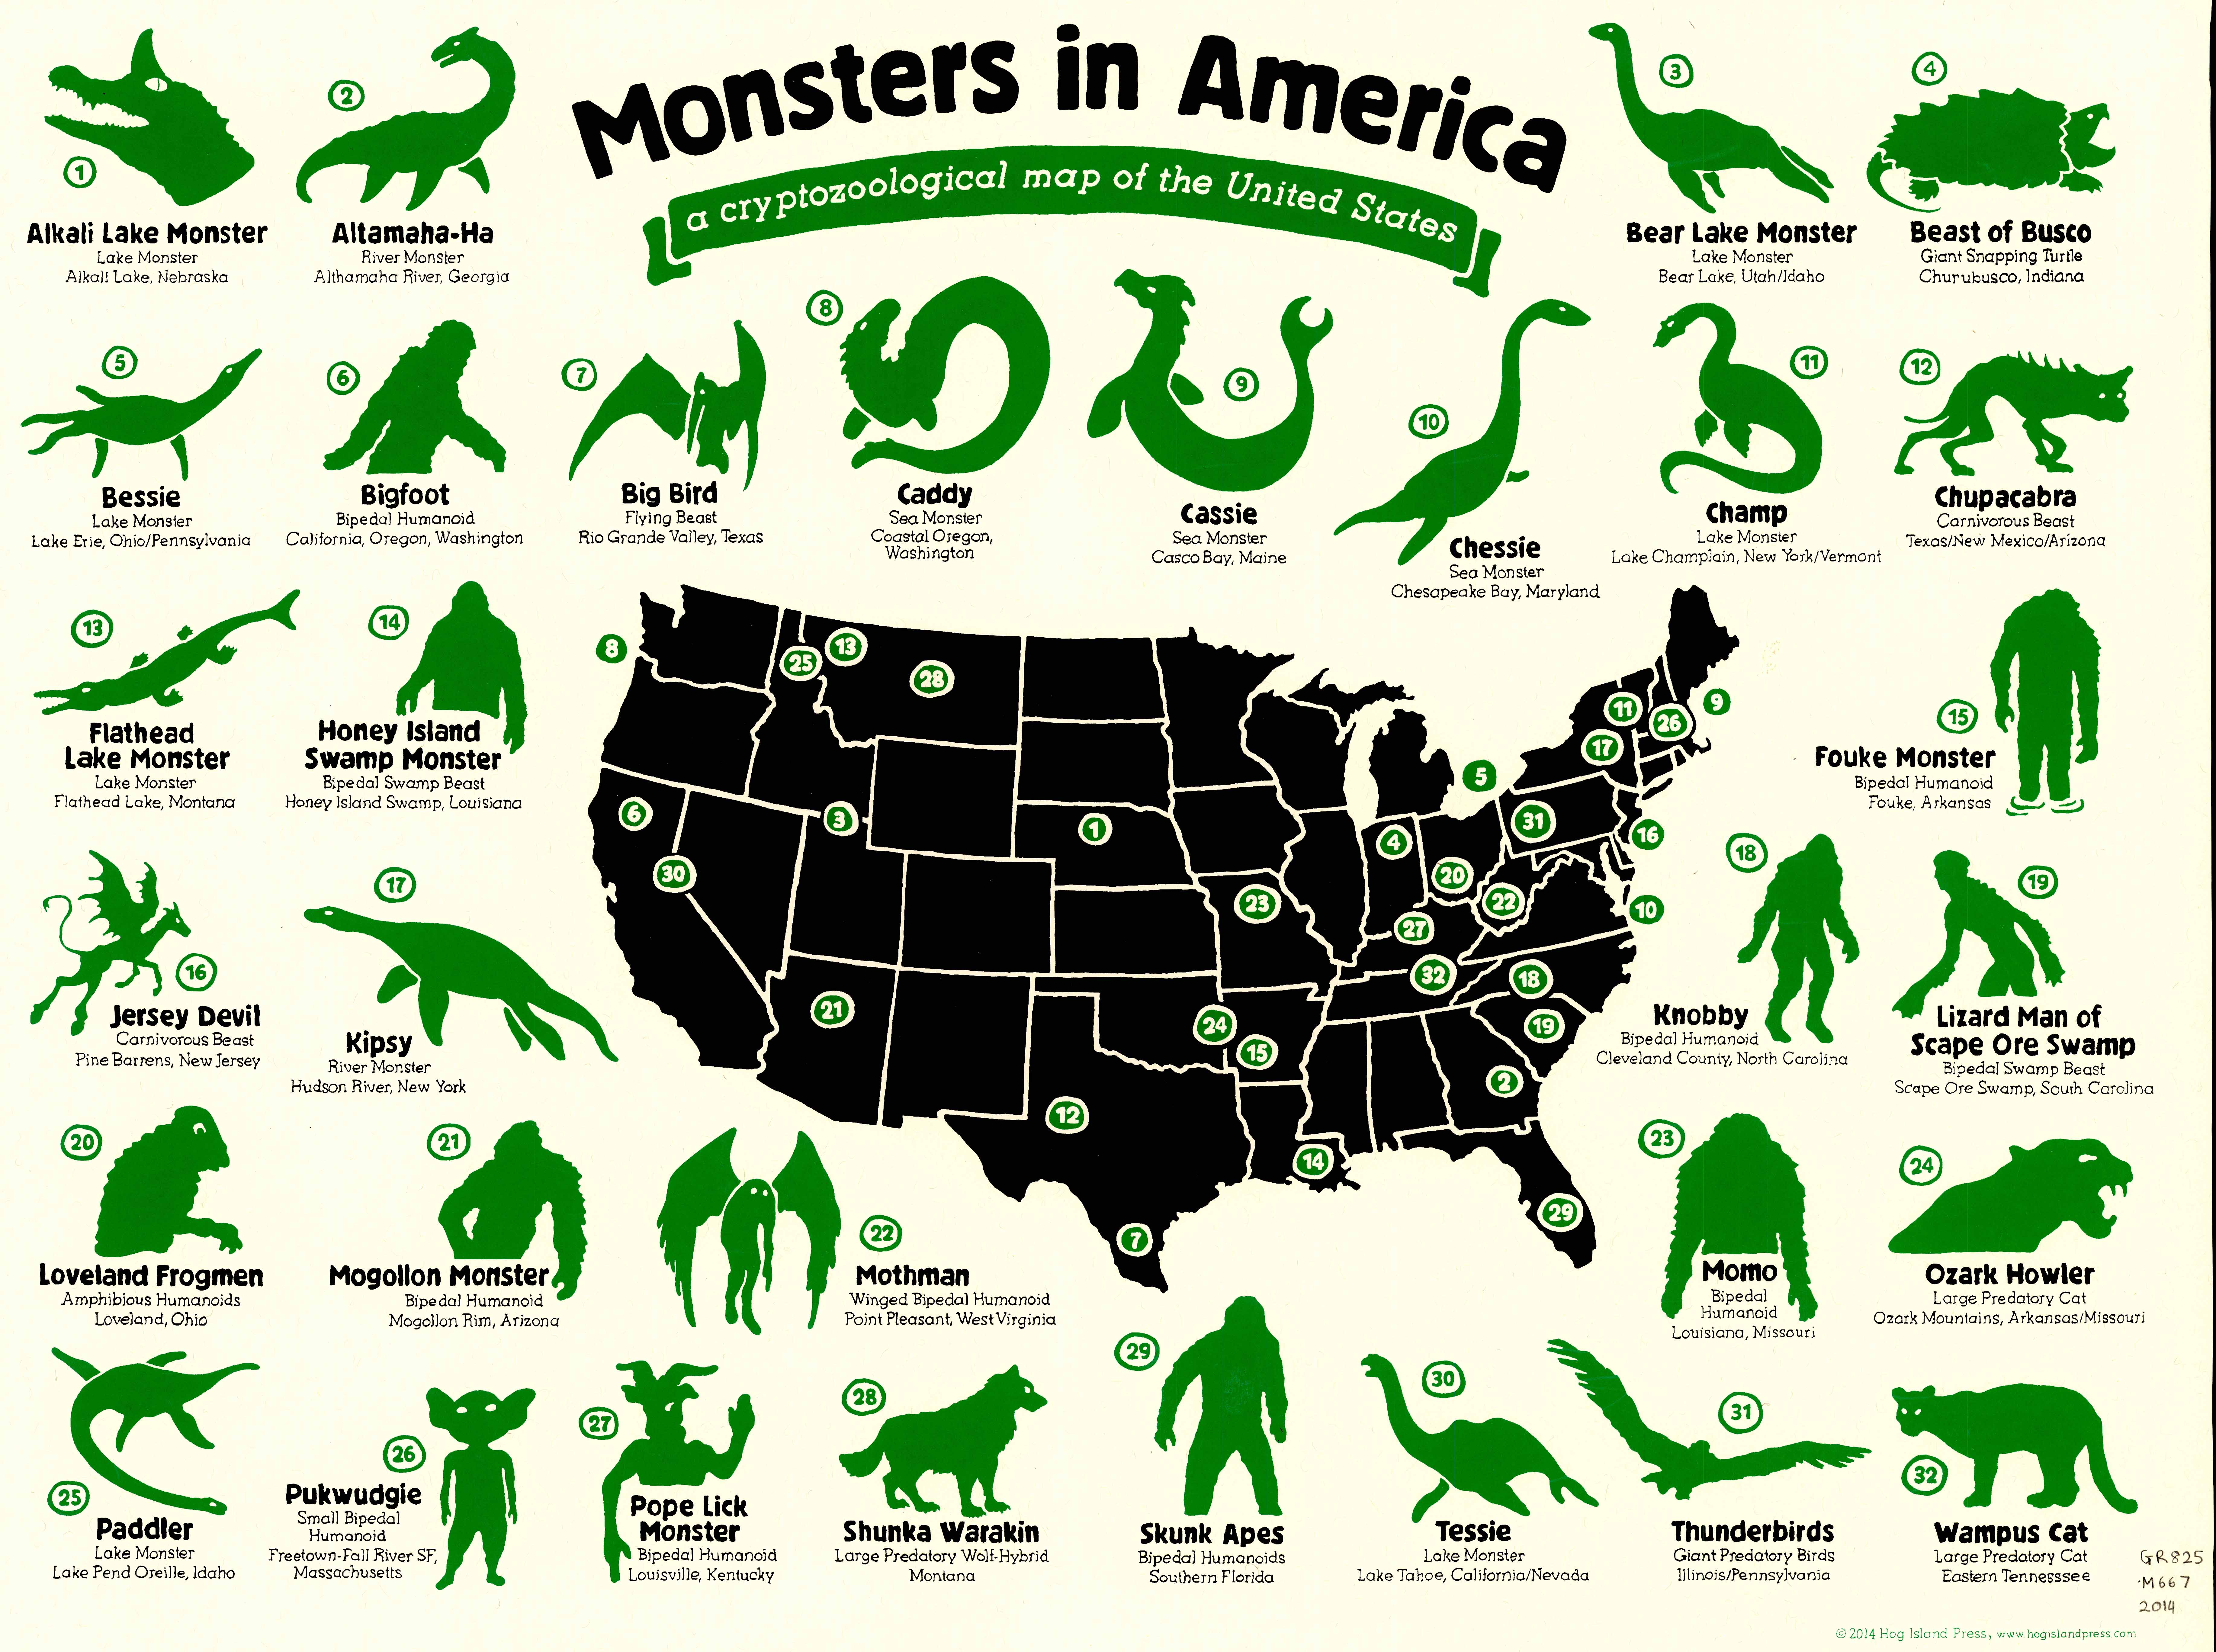 Map showing monsters and their locations in America